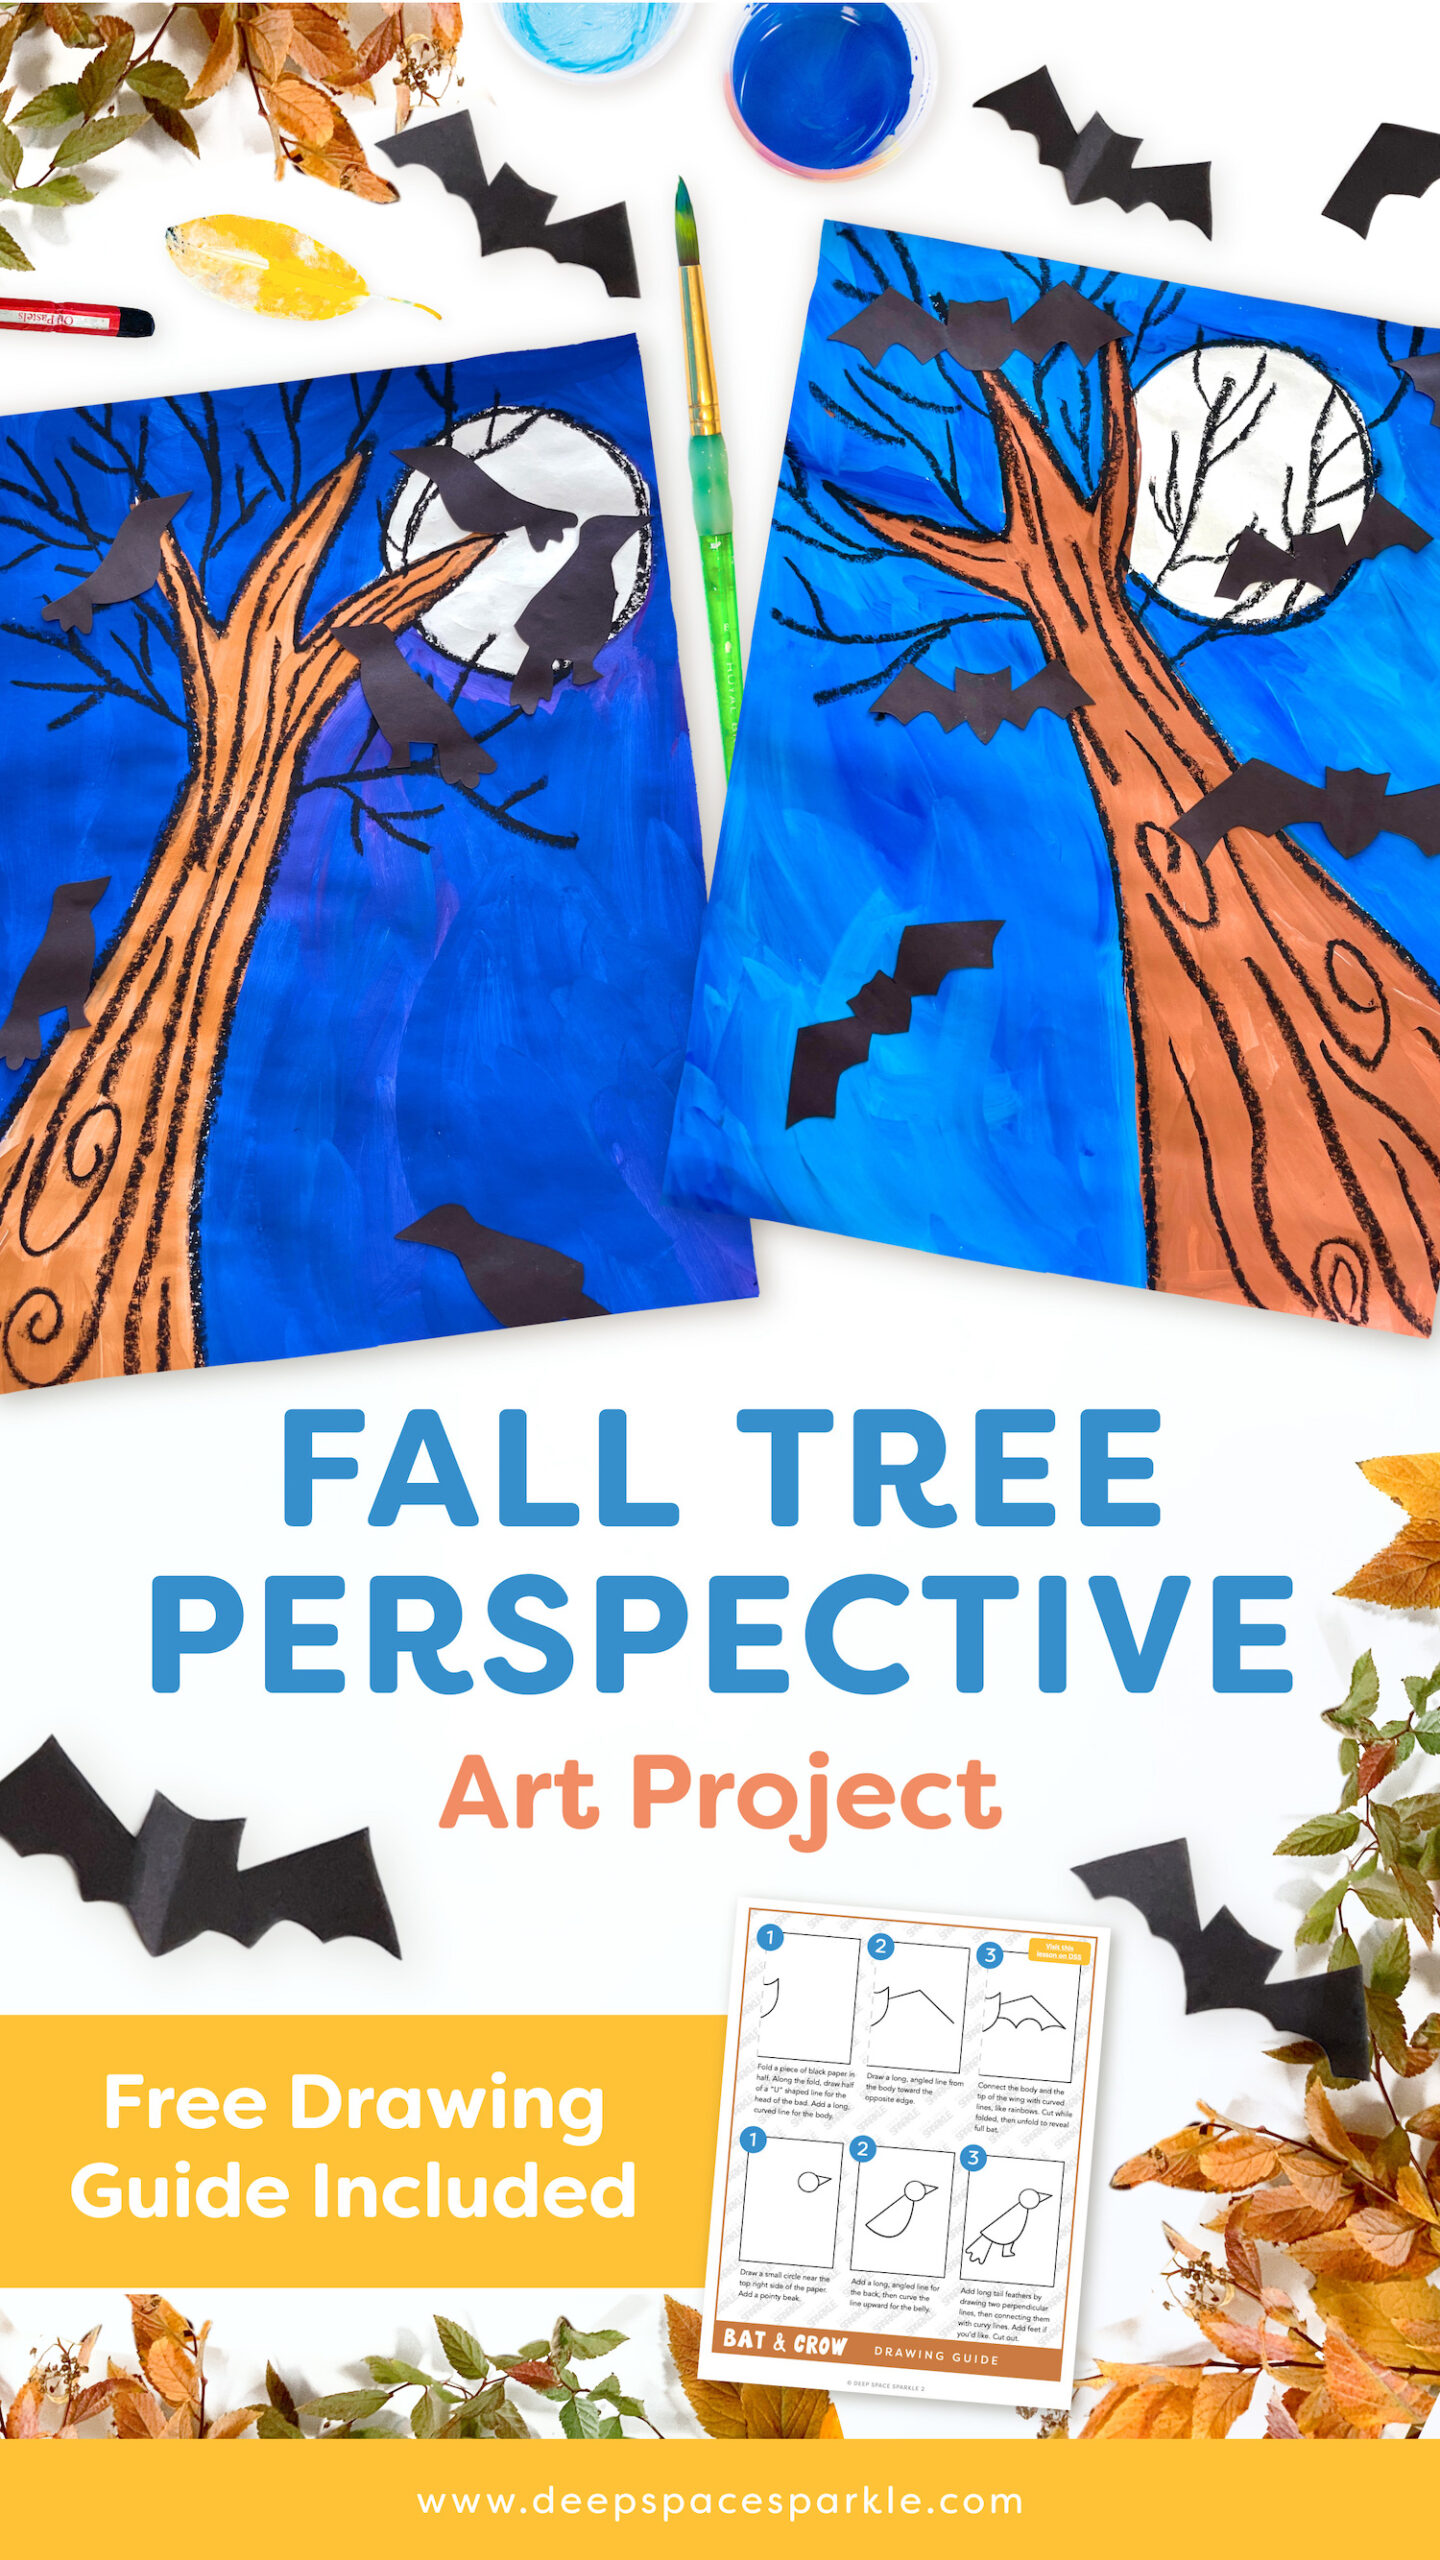 Fall Trees Perspective Art Project for October in the Art Room Lessons for Kids